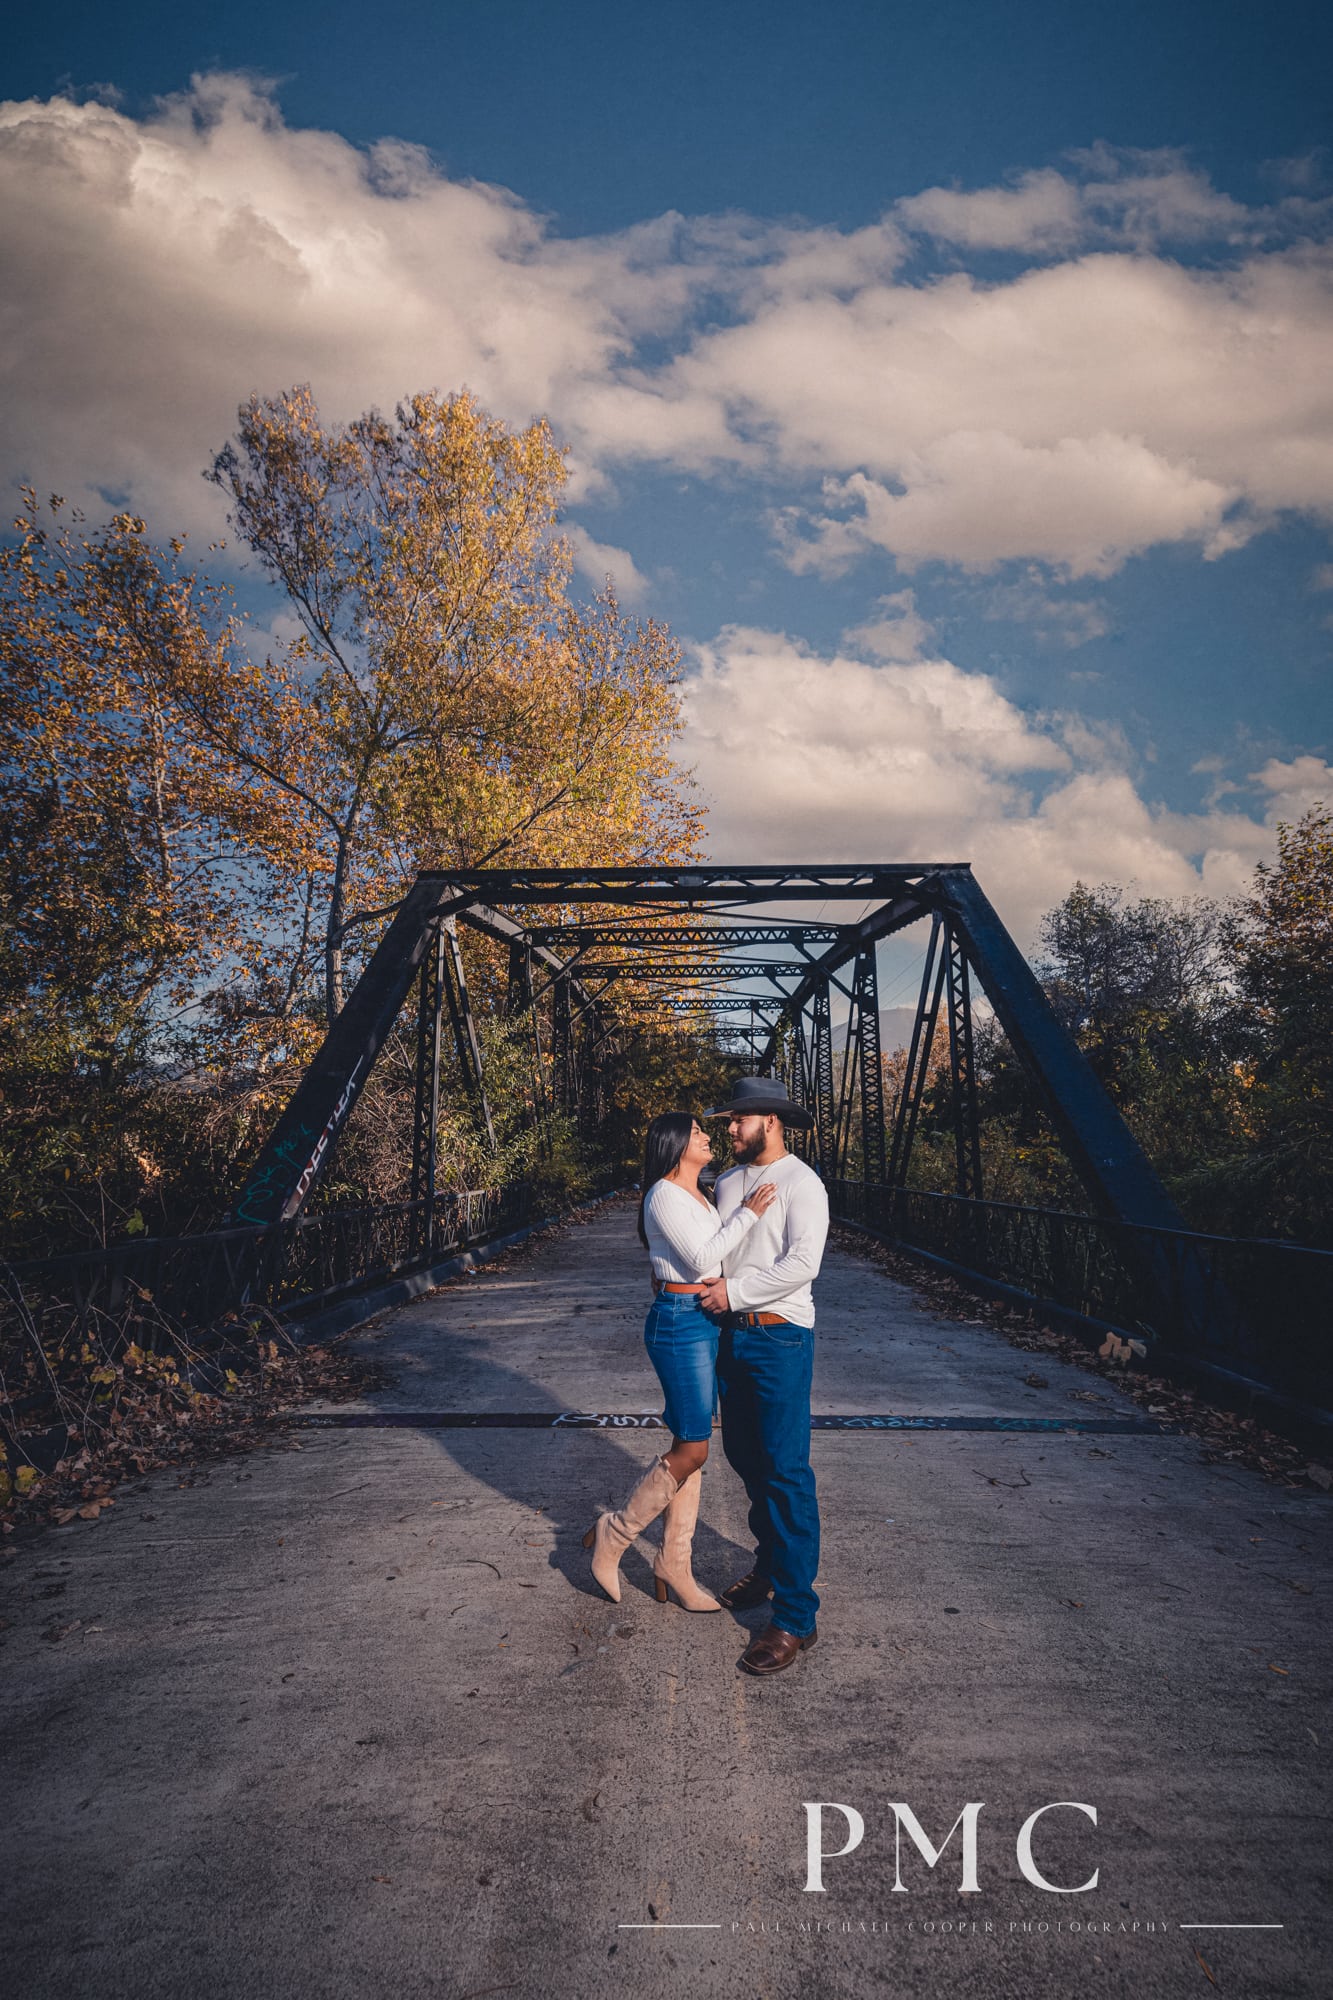 A cinematic portrait of a couple embracing on a bridge during their fall engagement session.